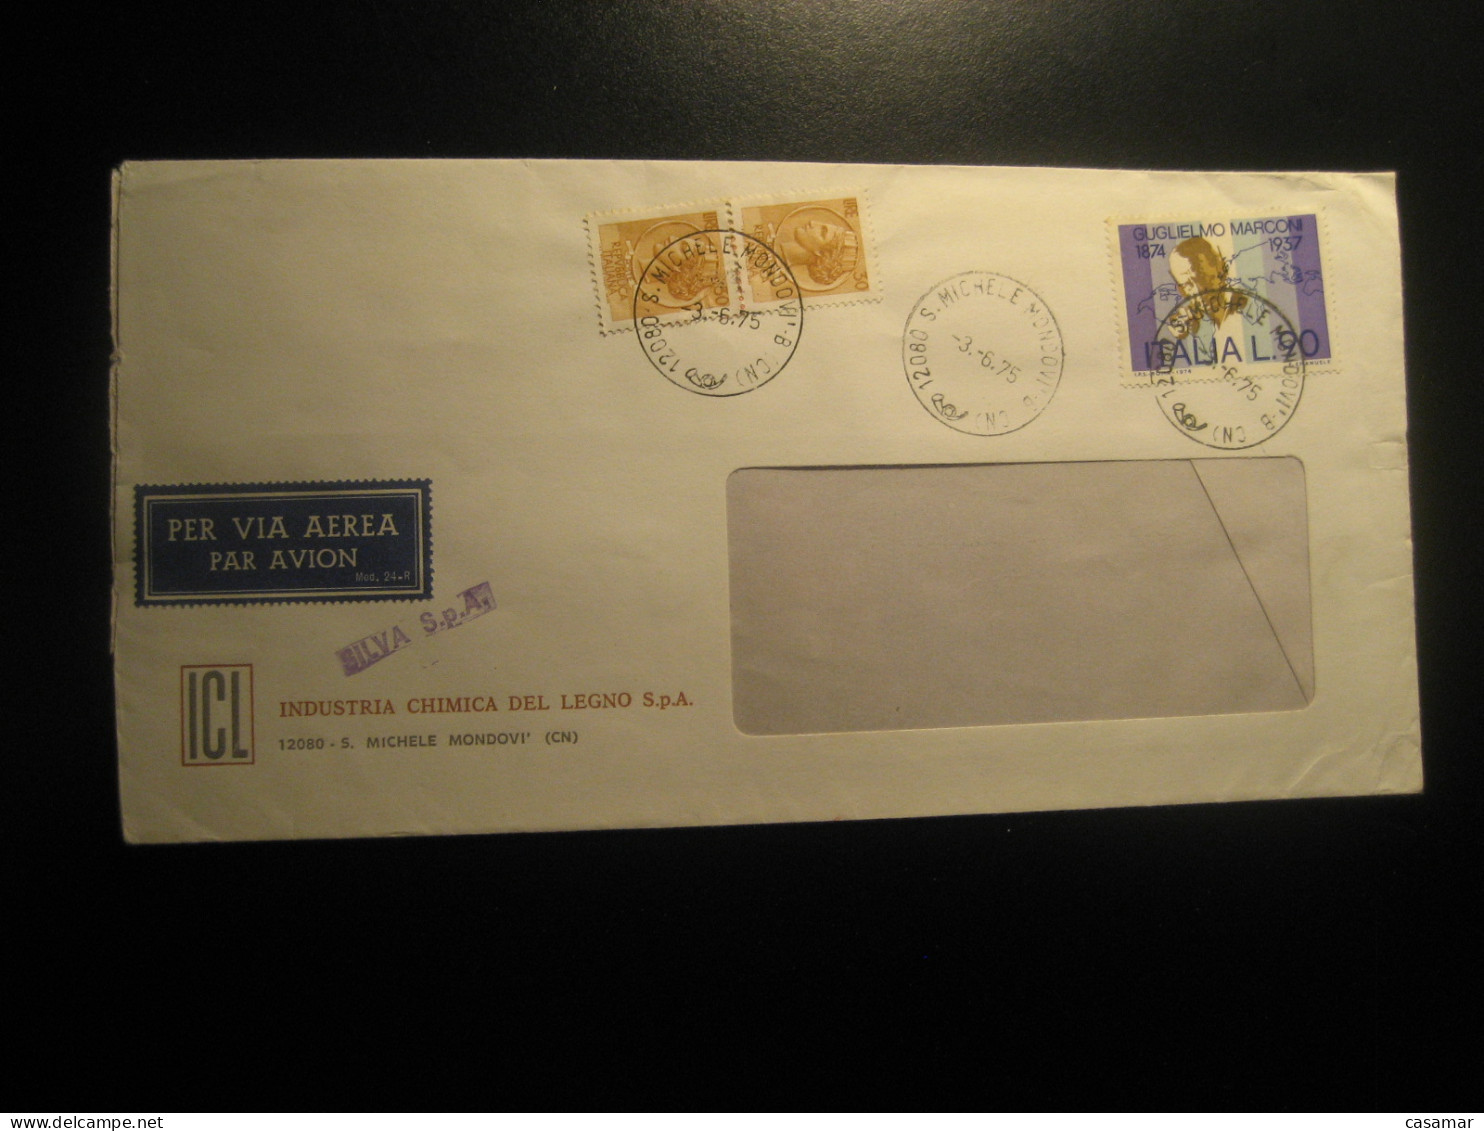 S. MICHELE MONDOVI 1975 Industria Quimica Del Legno Leather Cuir Chemical Chemistry Air Mail Cancel Cover ITALY - Chemistry